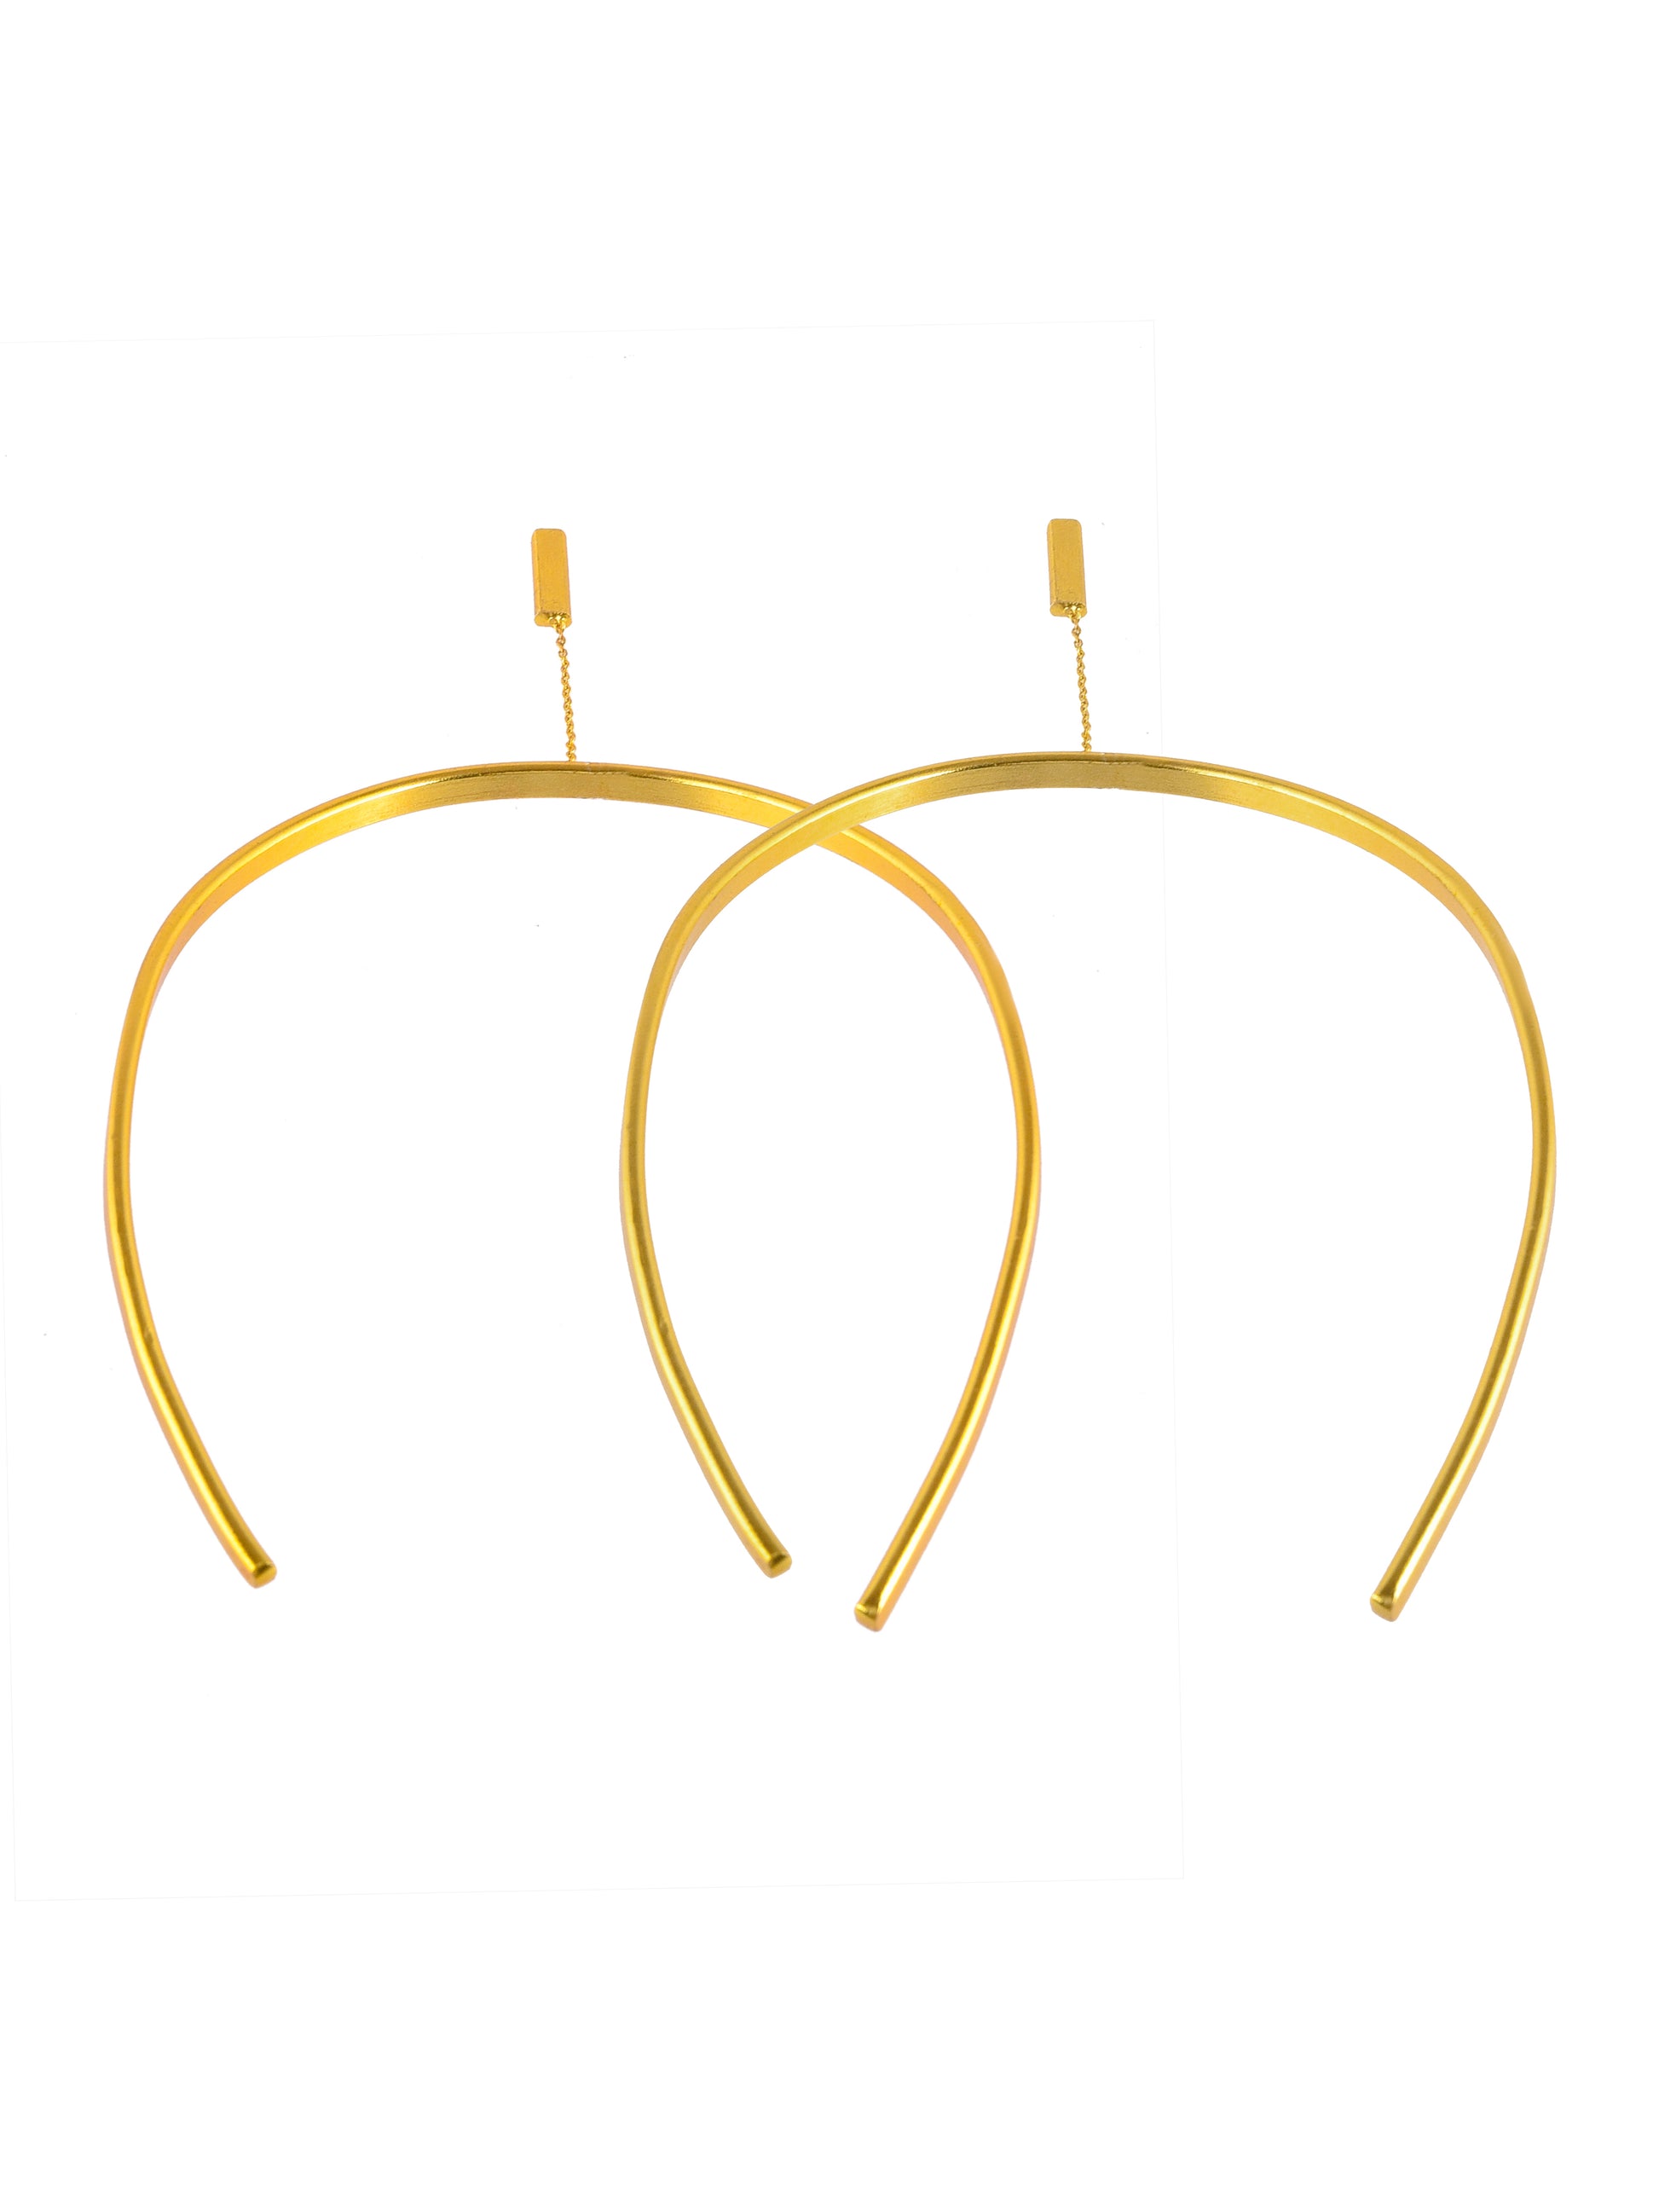 Set Of 2 Gold-Plated Contemporary Designer Barefoot Anklets